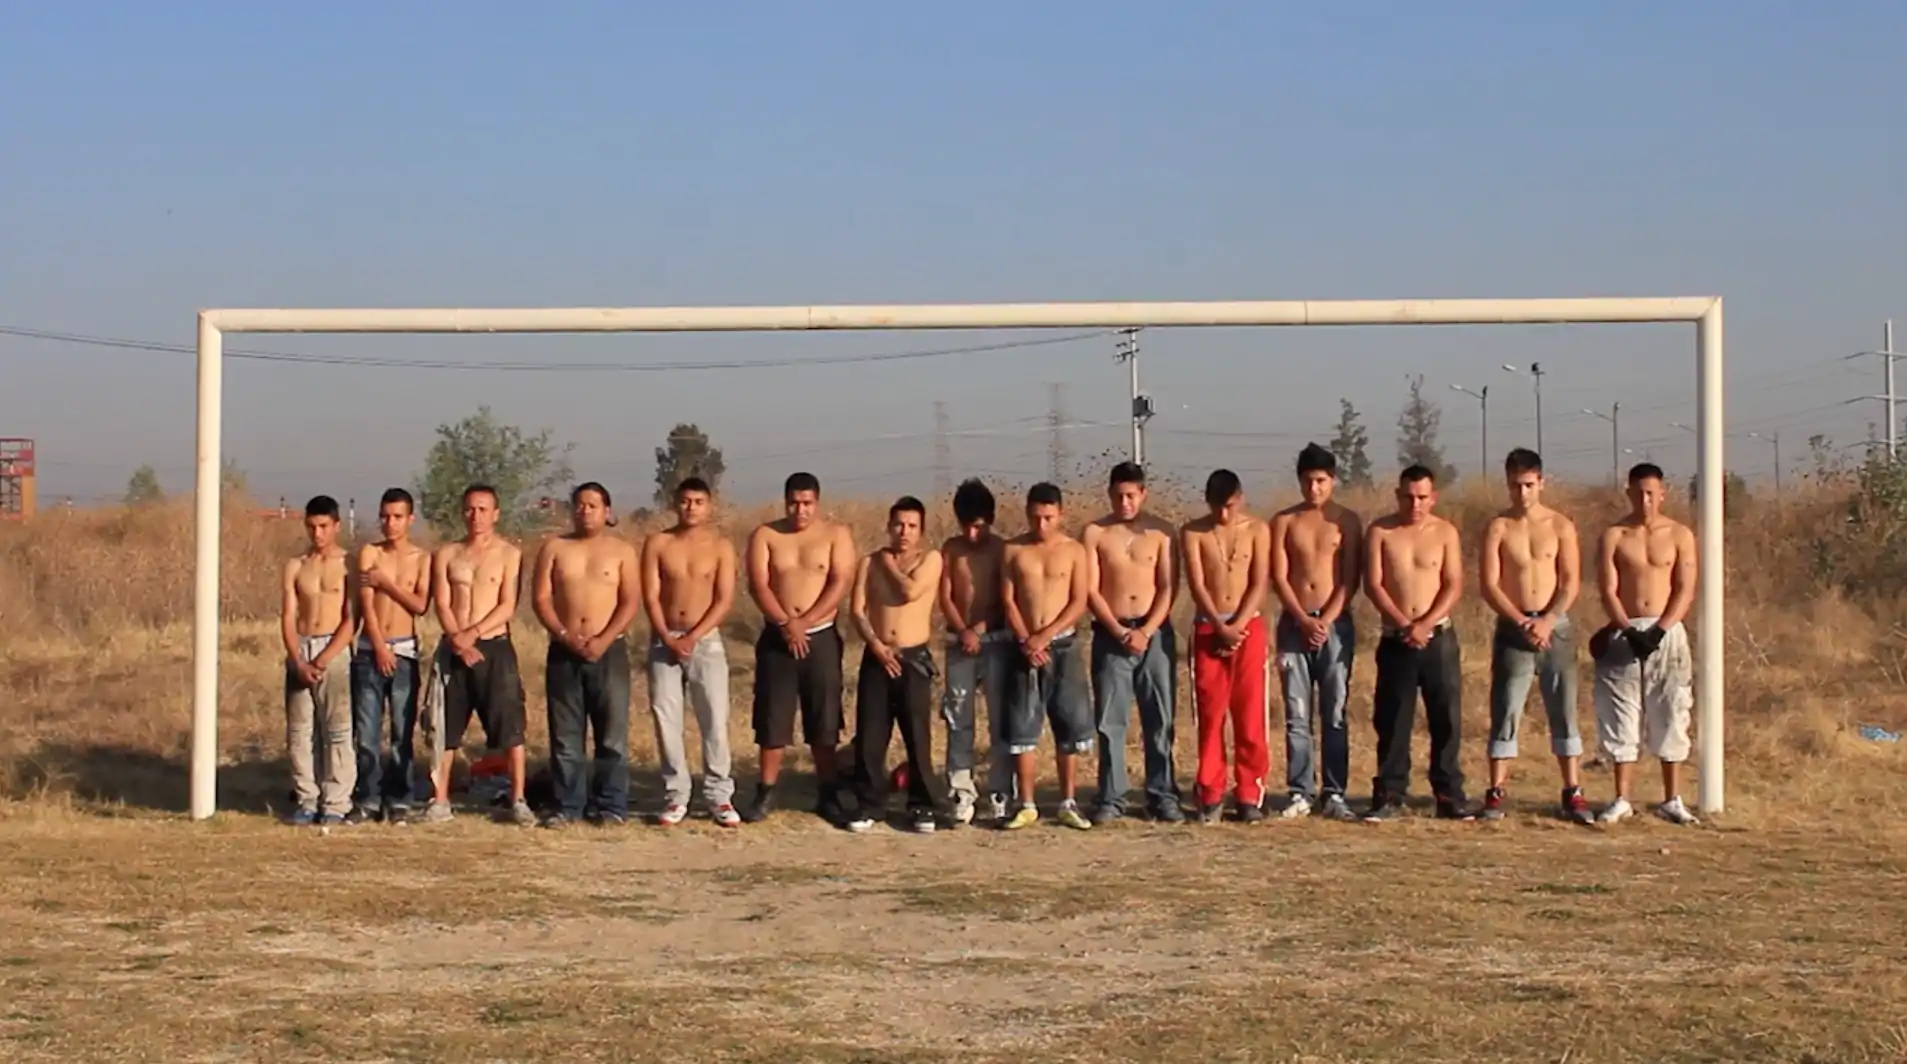 Politica deportiva. video art about politics and football by mexican artist